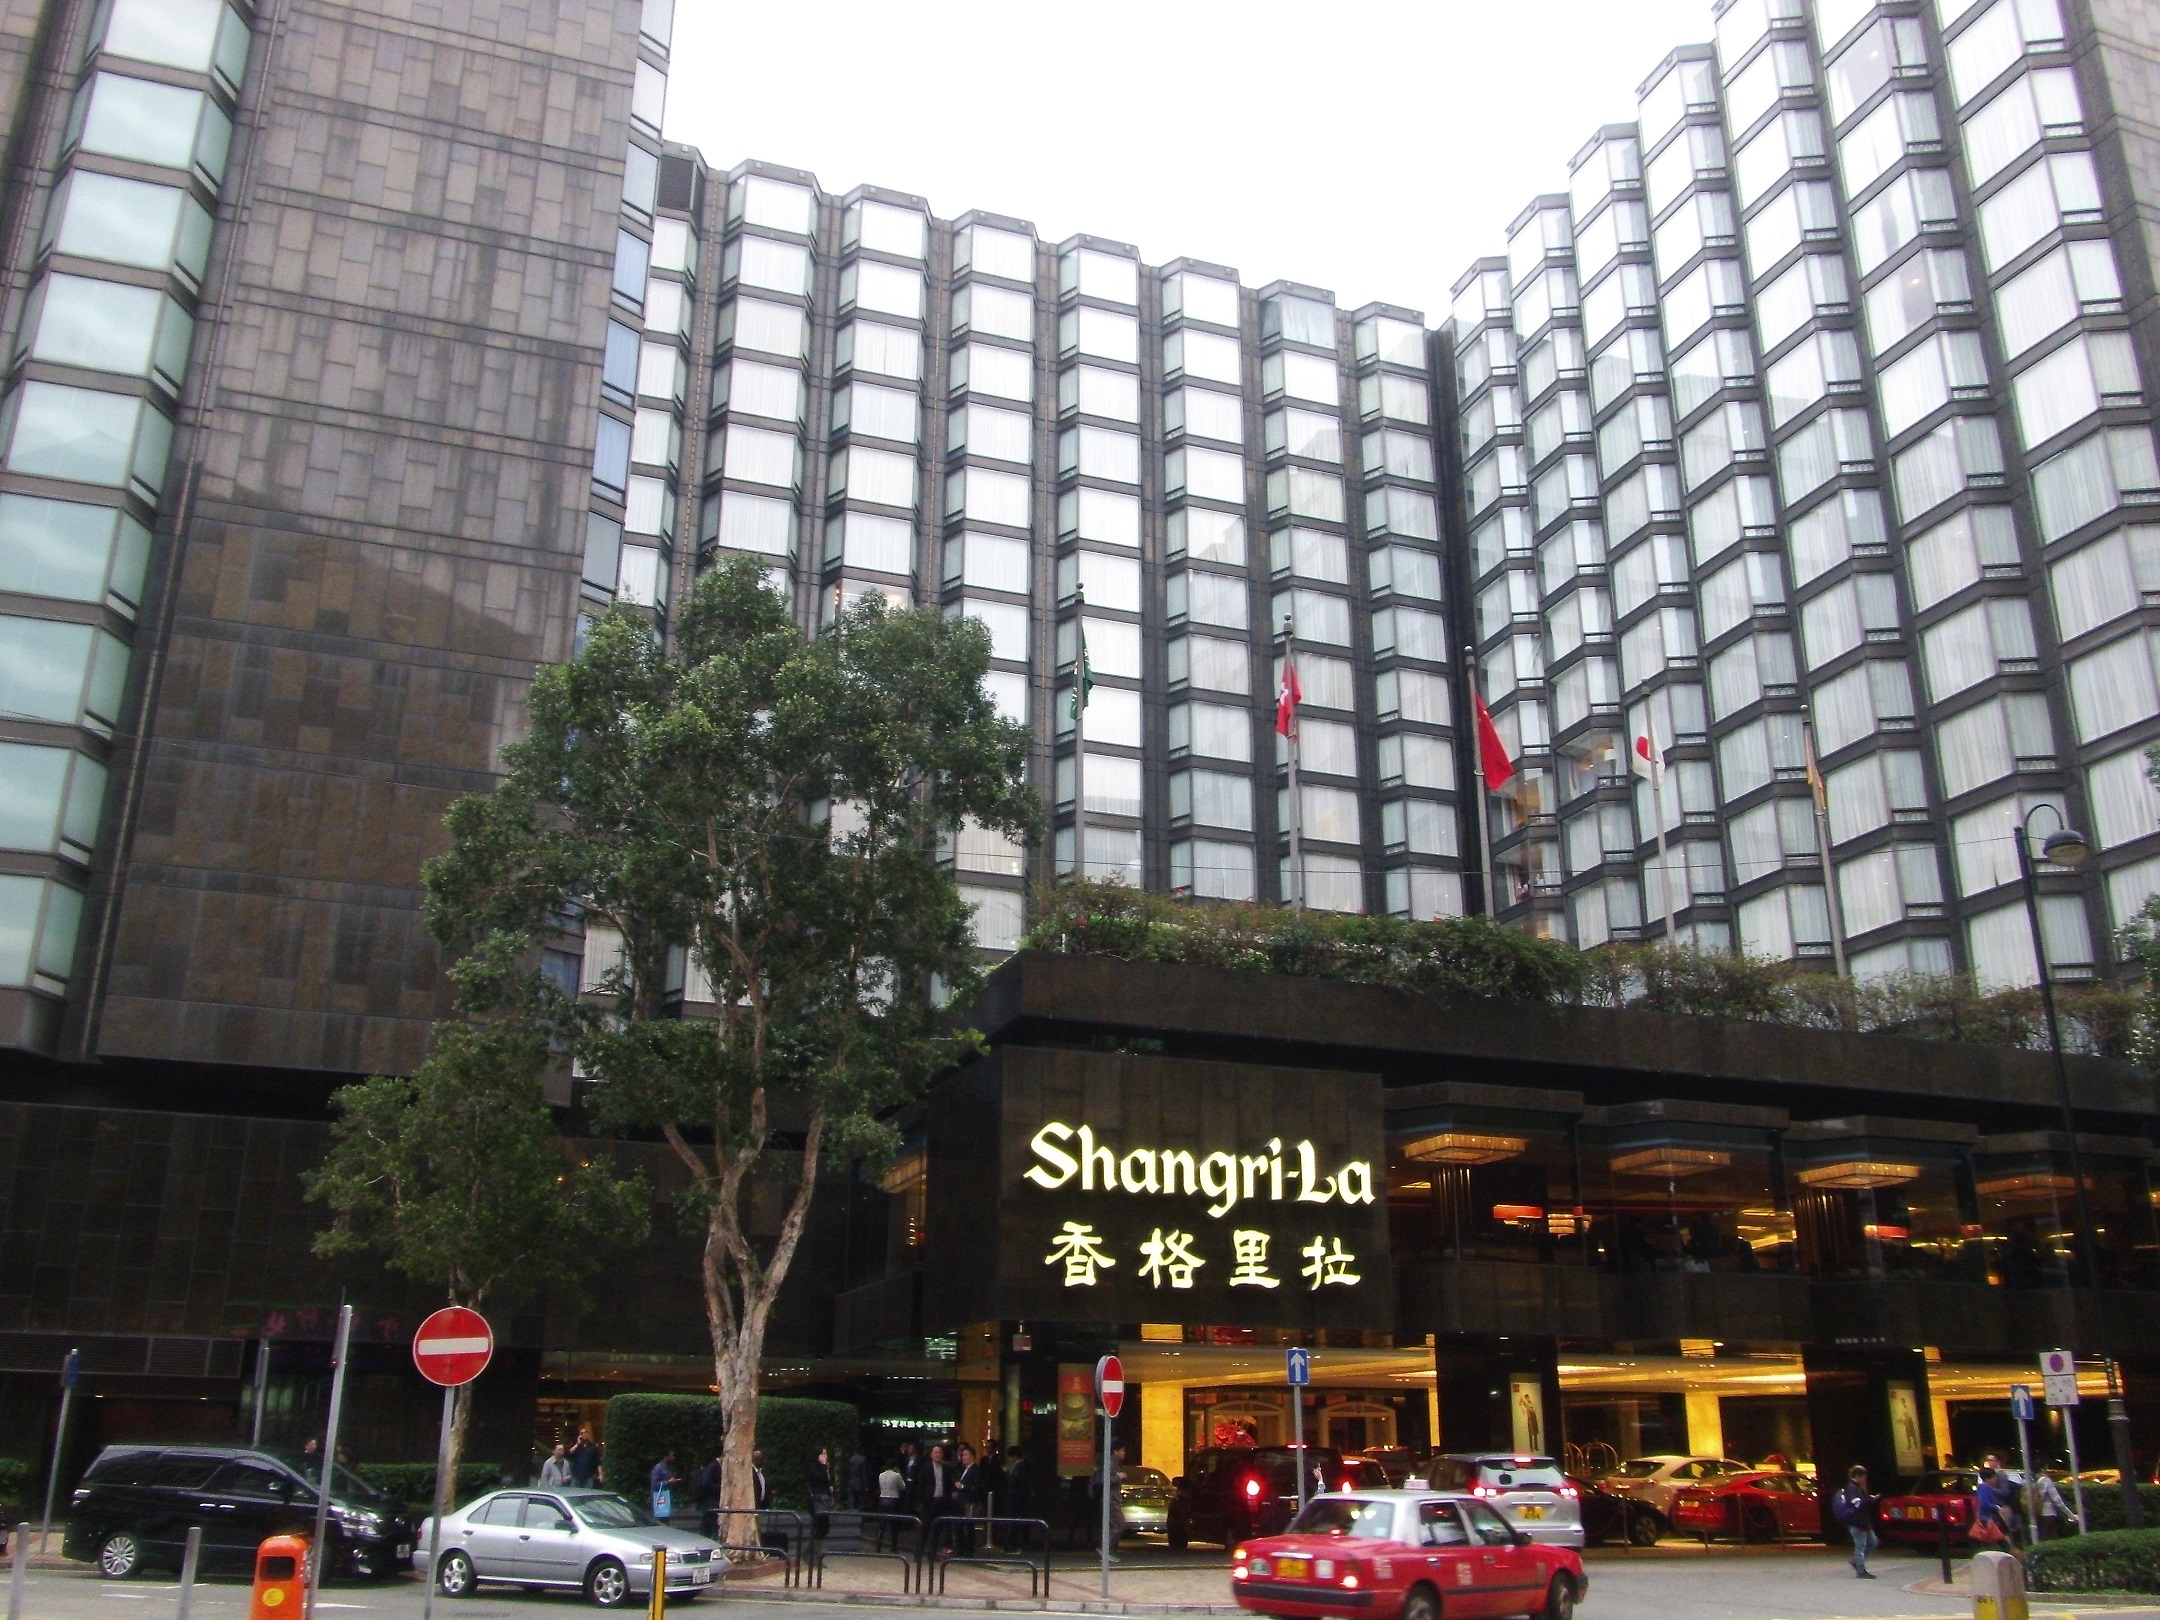 Even the lobby of Star Hotels, like Kowloon Shangri-La, open to the public. Travelers can use their toilet.